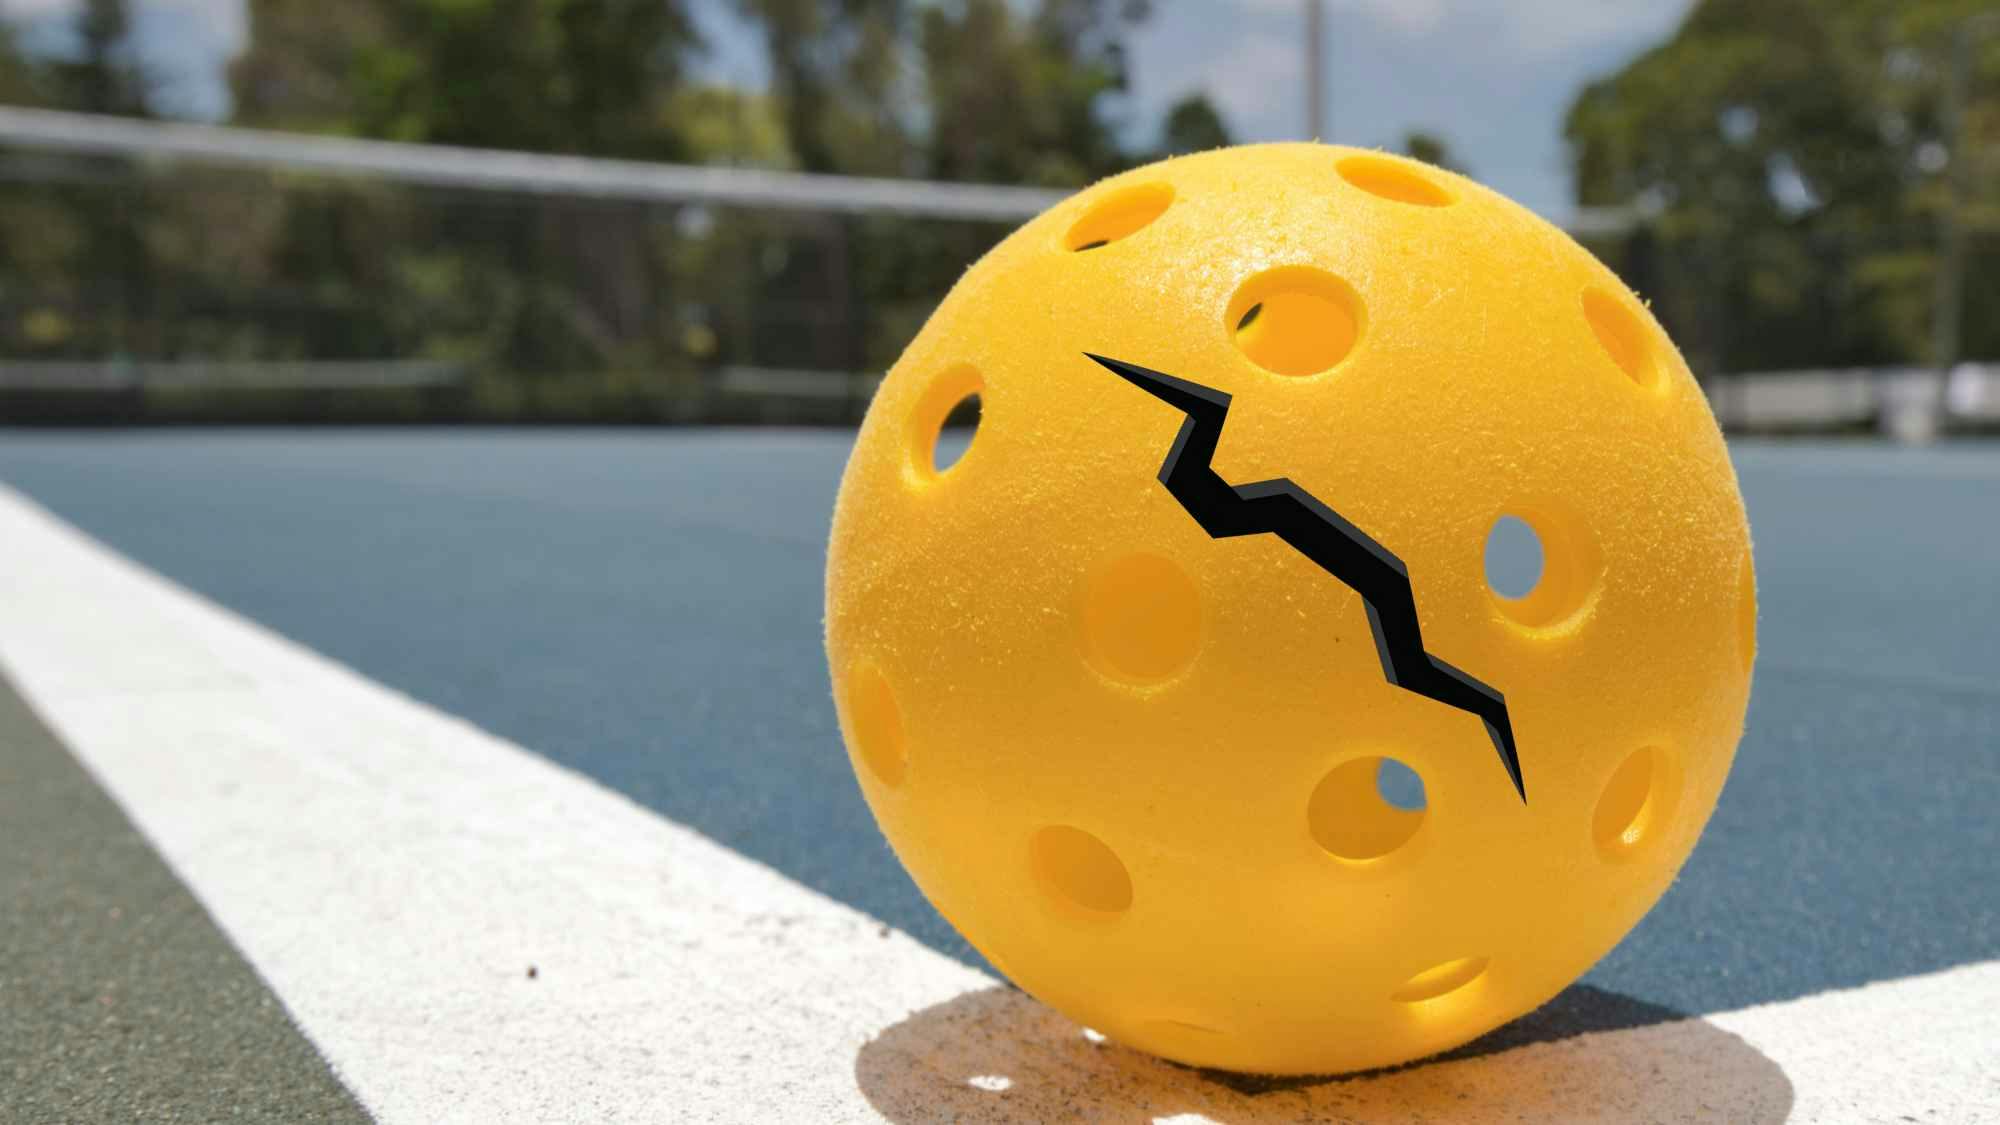 TOUGH BREAKS IN THE LIFE OF A PICKLEBALL